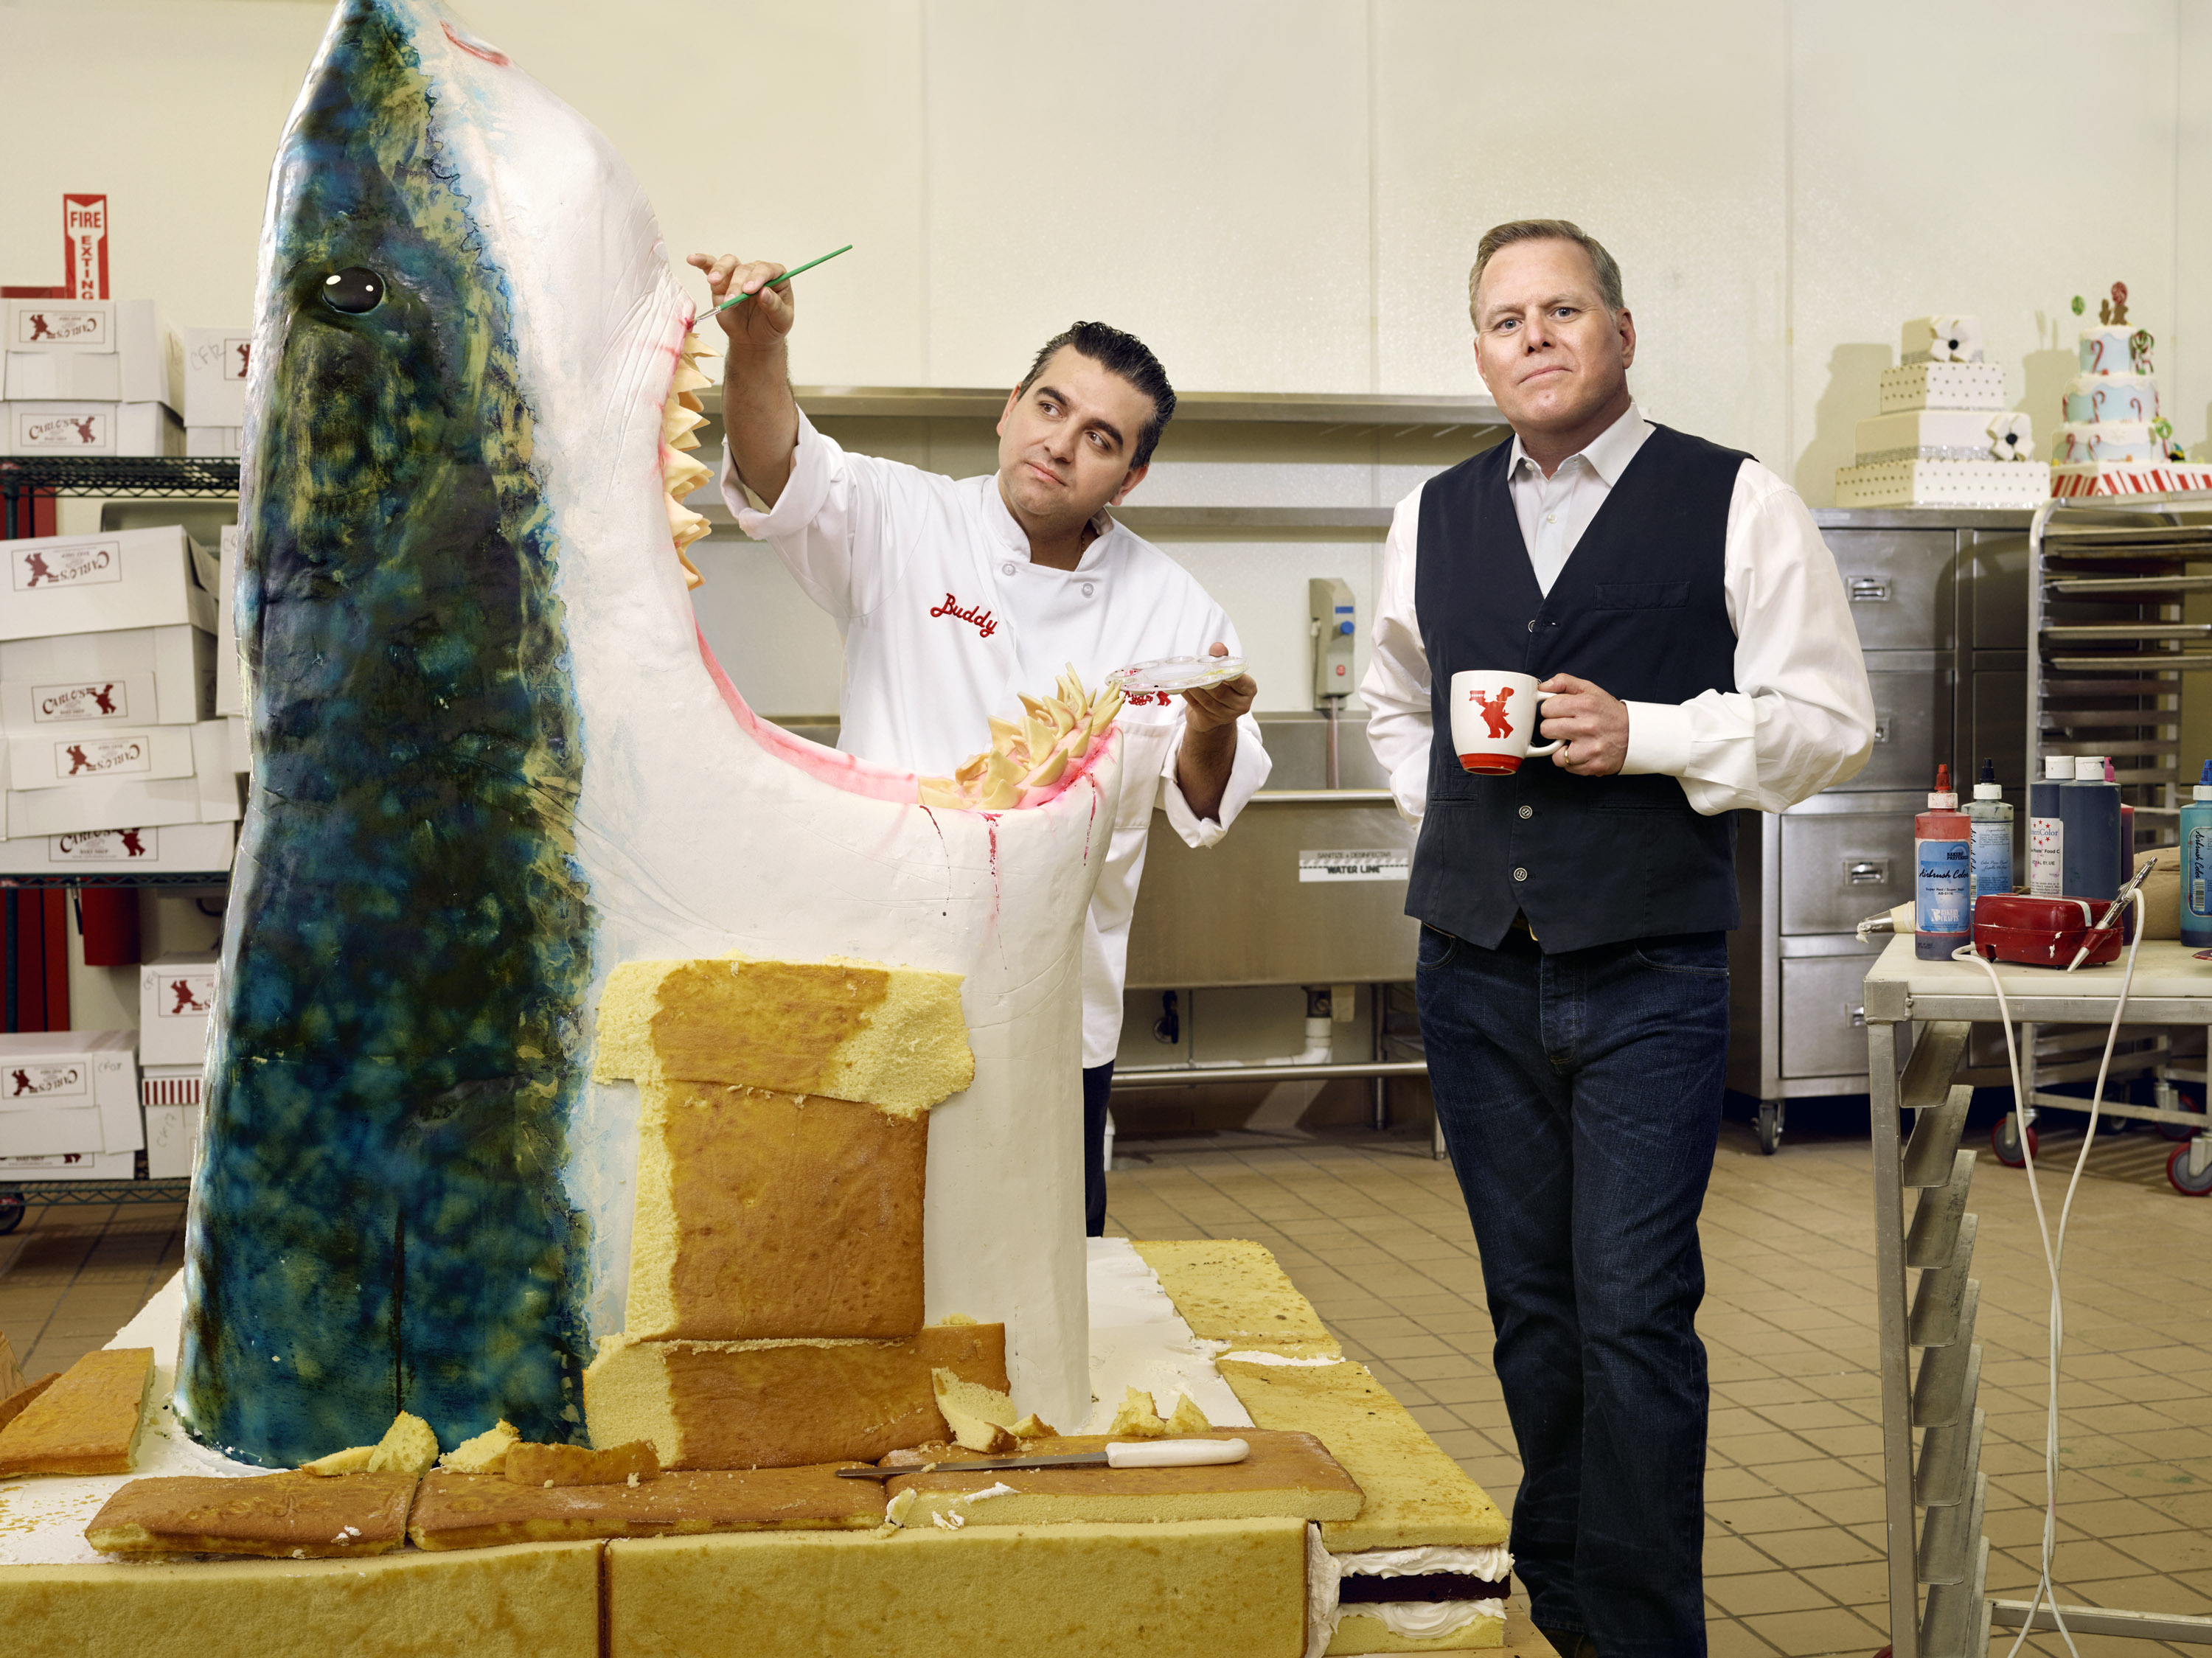 Cake Boss Buddy Valastro, left, and David Zaslav at a Carlo’s bakery facility in Jersey City, N.J. (Martin Schoeller for TIME)